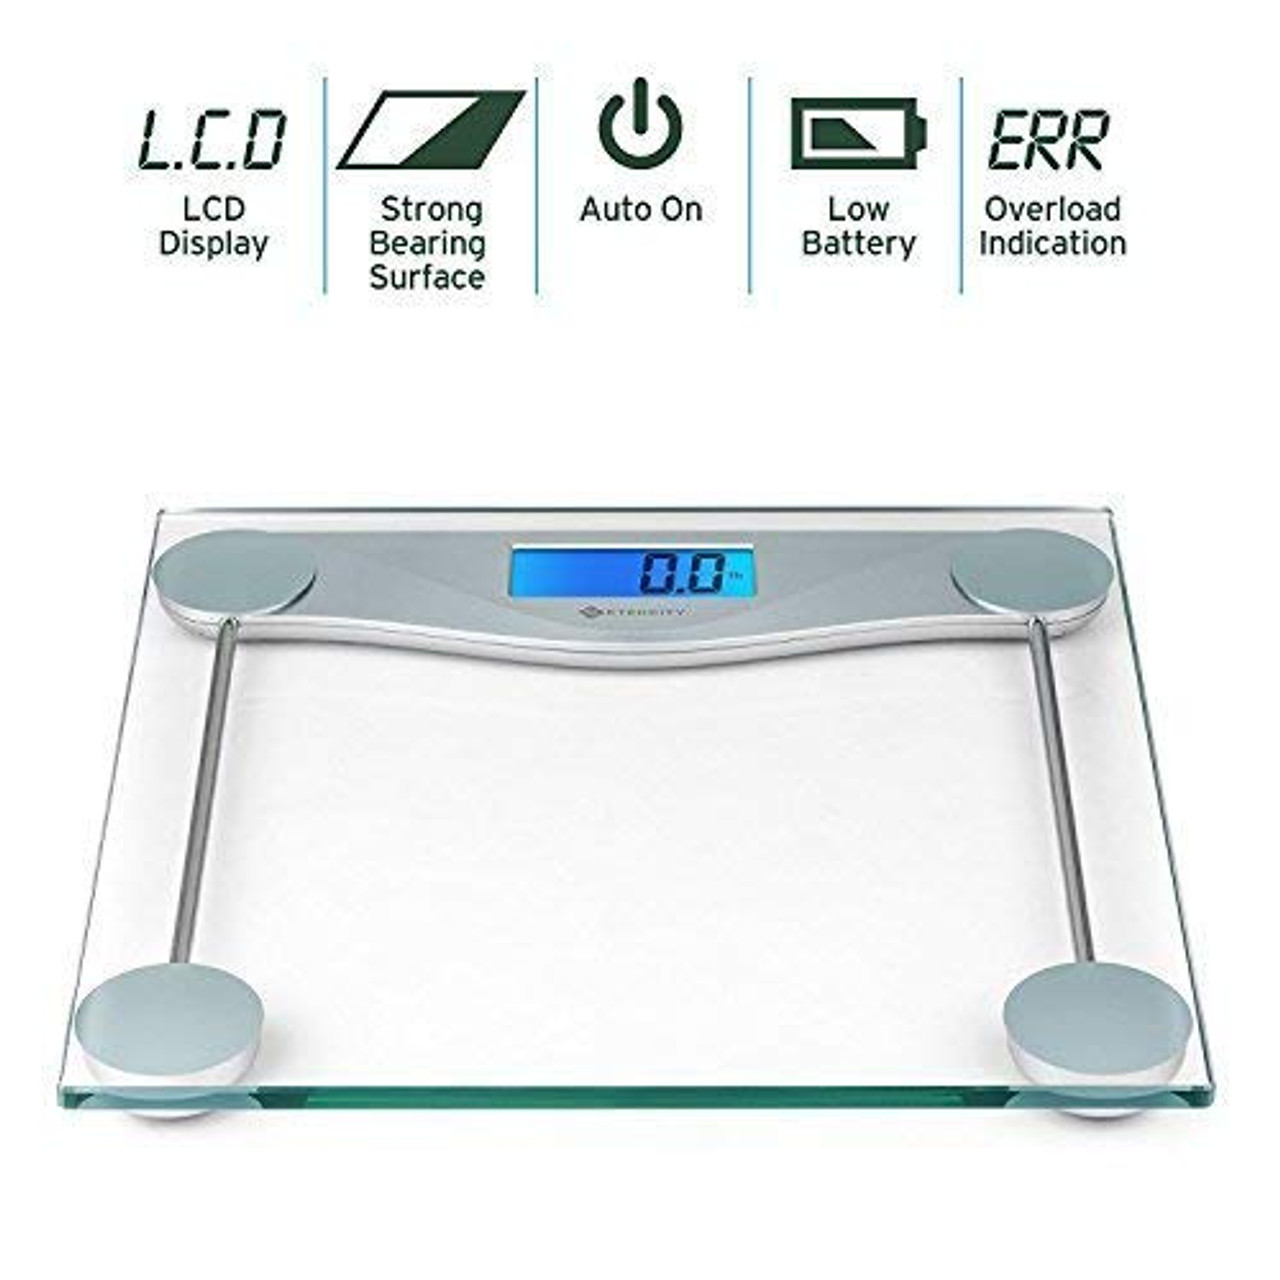 Sharper Image Digital Bathroom Scale, Tracks Weight, Body Fat & BMI, Bluetooth/Android & iOS App Compatible, White